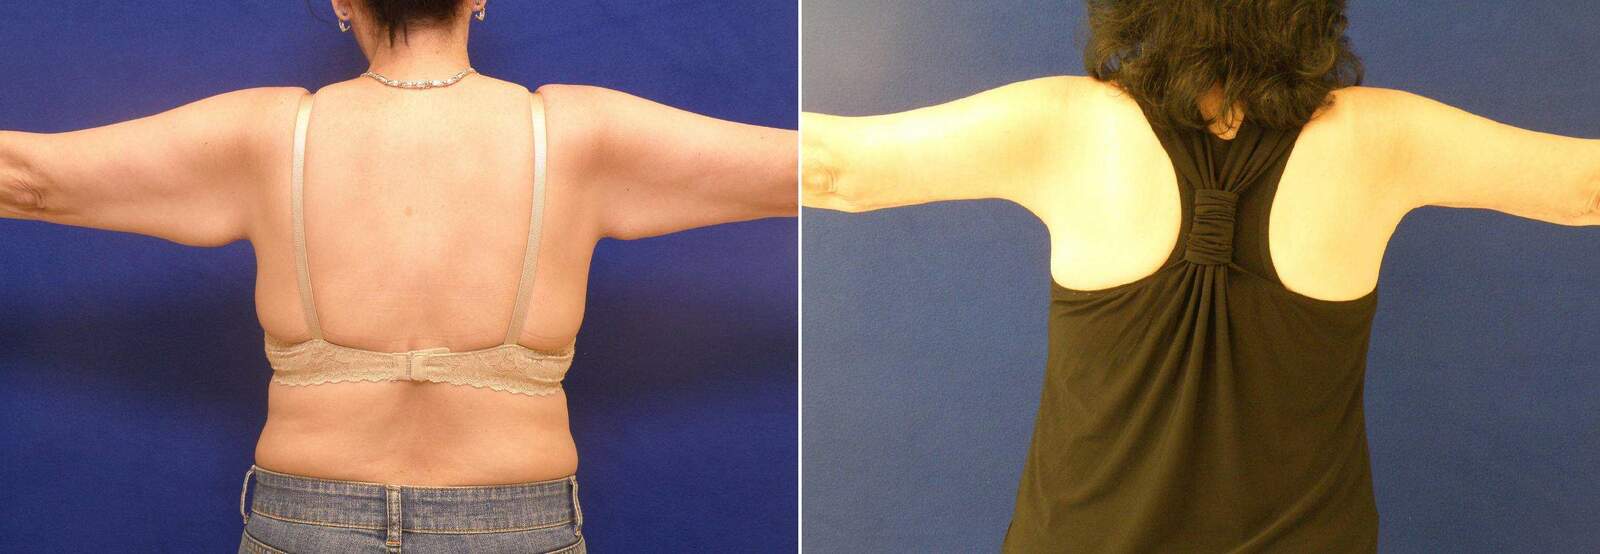  Before and After Photos in , , Arm Lift in Lexington, KY